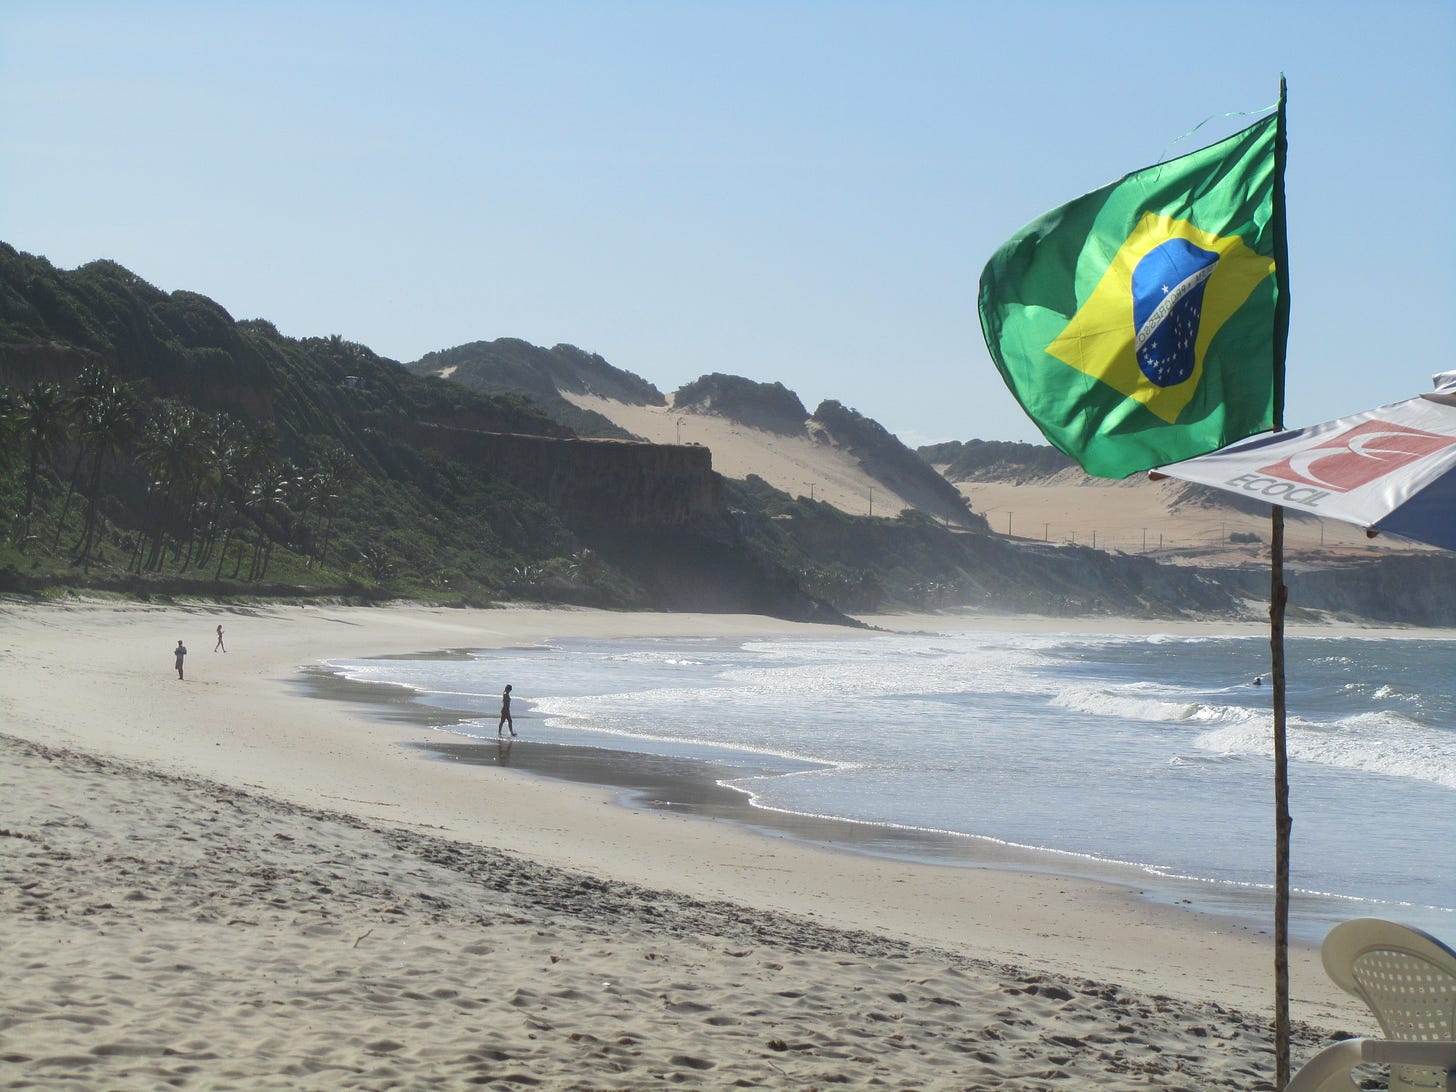 30 June 2014: Maybe this is more likely what Cabral saw. Amazing Praia da Pipa (Pipa Beach), south of Natal, on the Brazilian coast. 